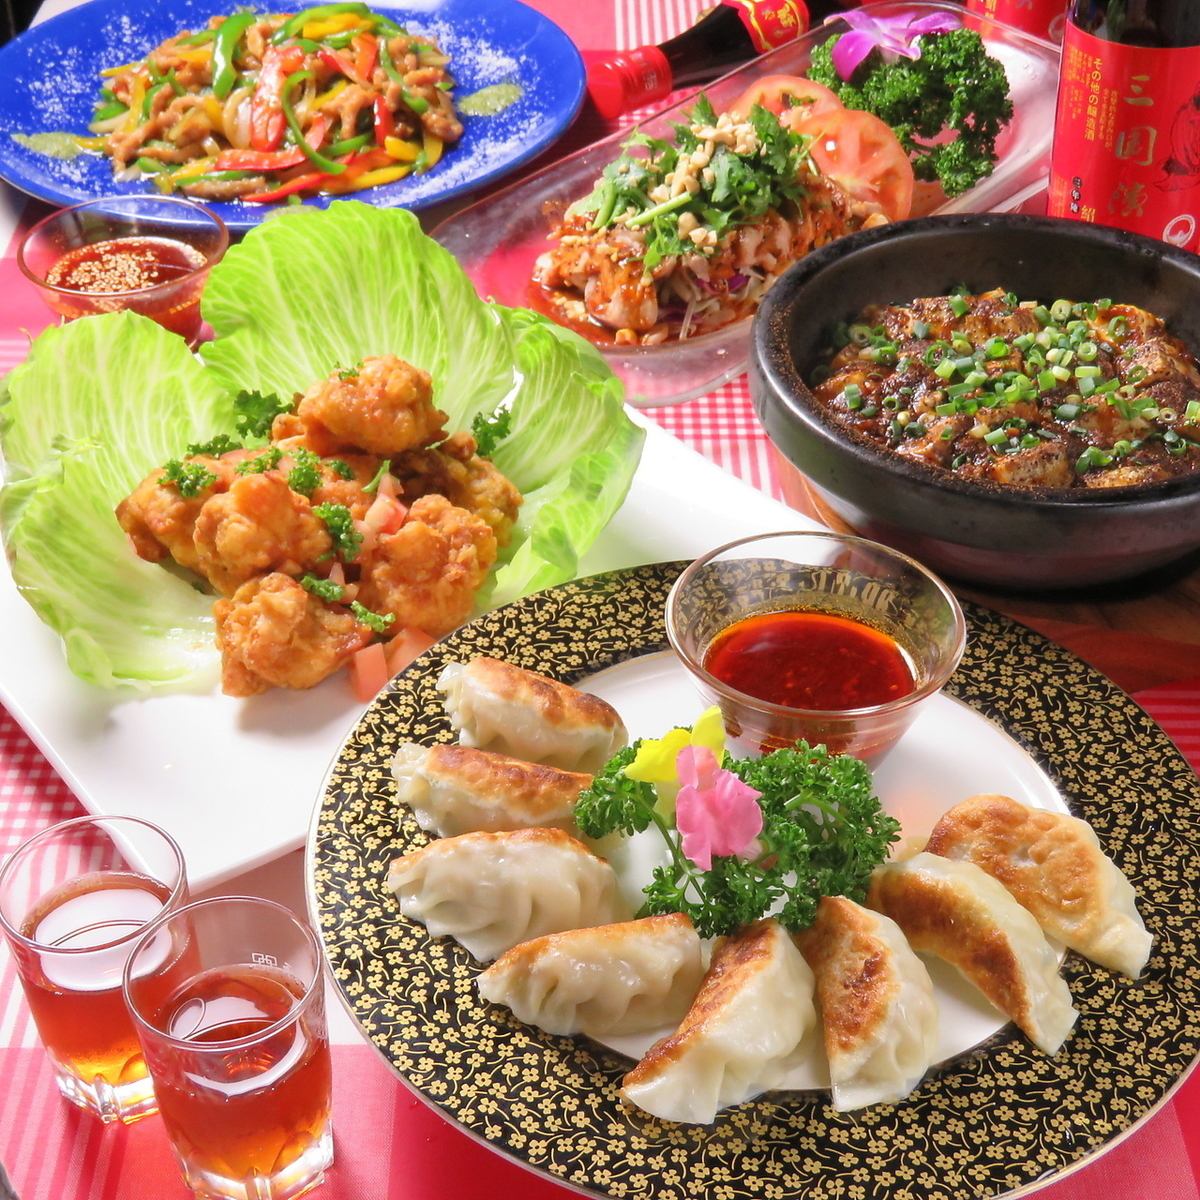 You can enjoy the delicious food that Shanghainese people love lively, regardless of the shape.